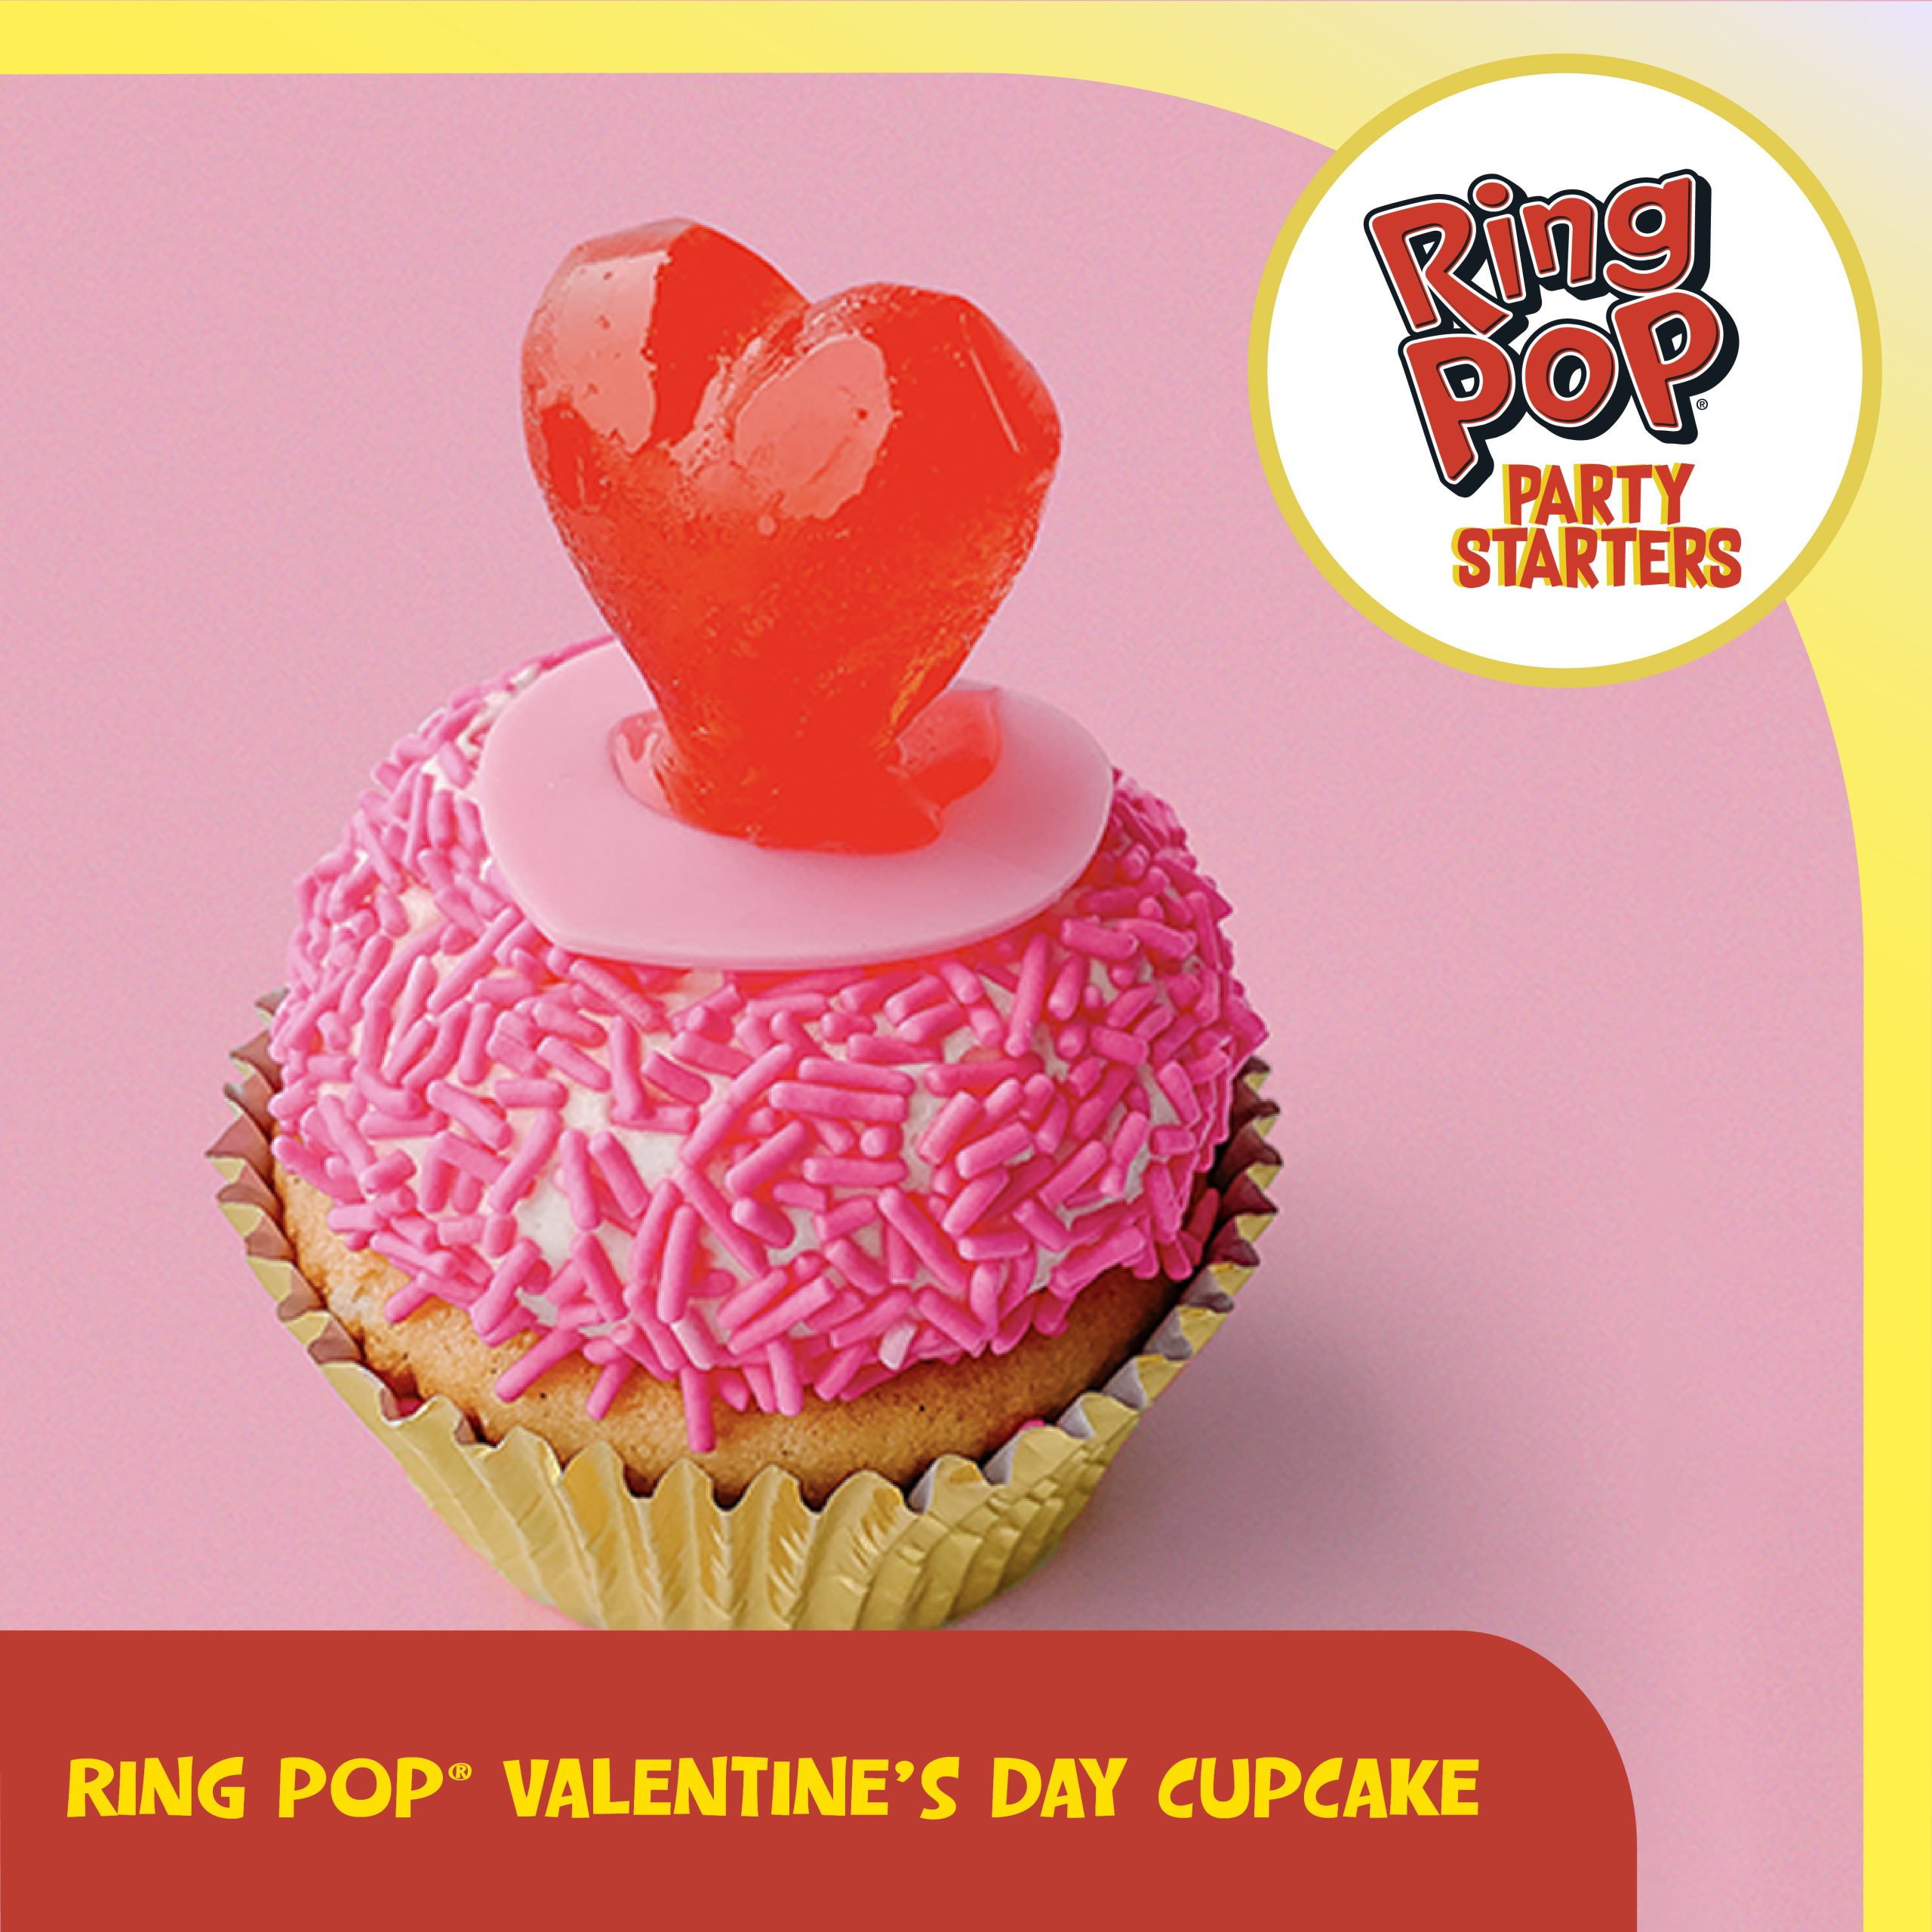 Ring Pop® Valentine’s Day Cupcakes